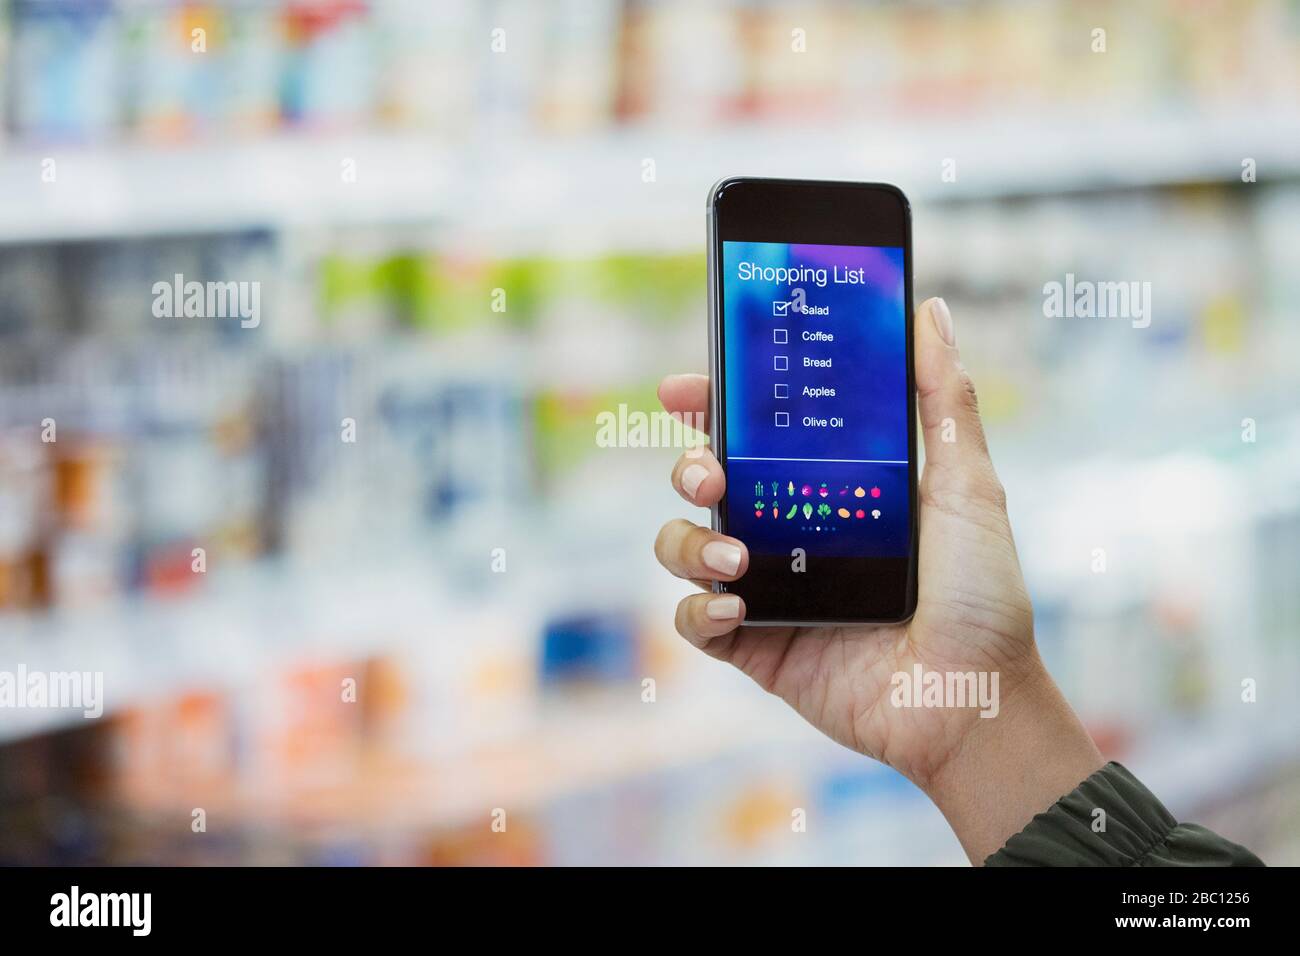 Personal perspective woman checking digital shopping list on smart phone in supermarket Stock Photo